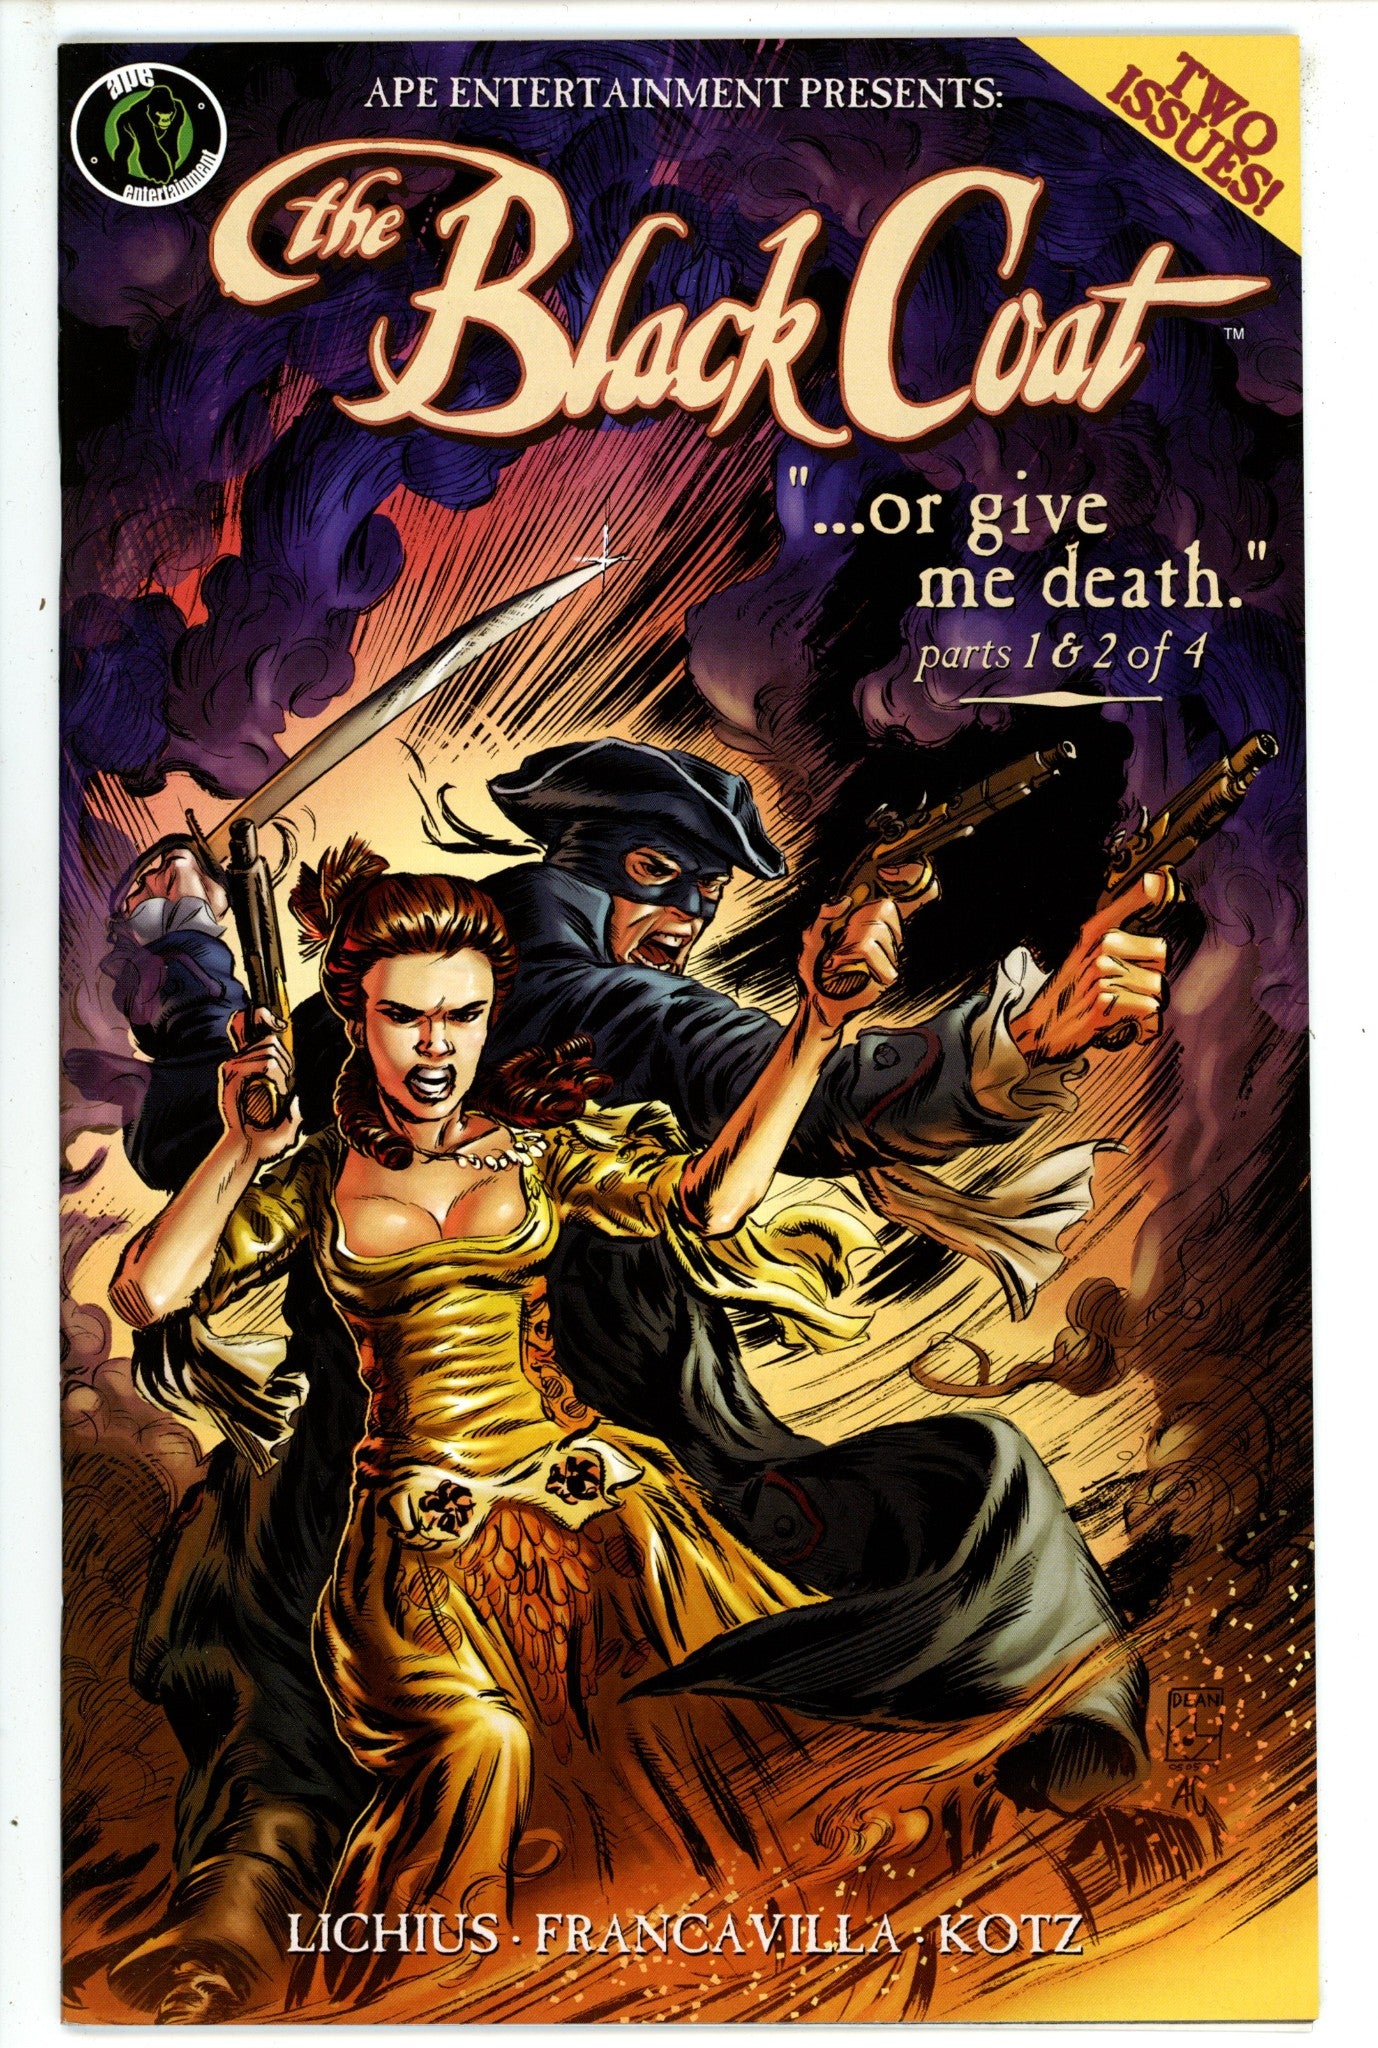 The Black Coat: Or Give Me Death 1 & 2 (2009)